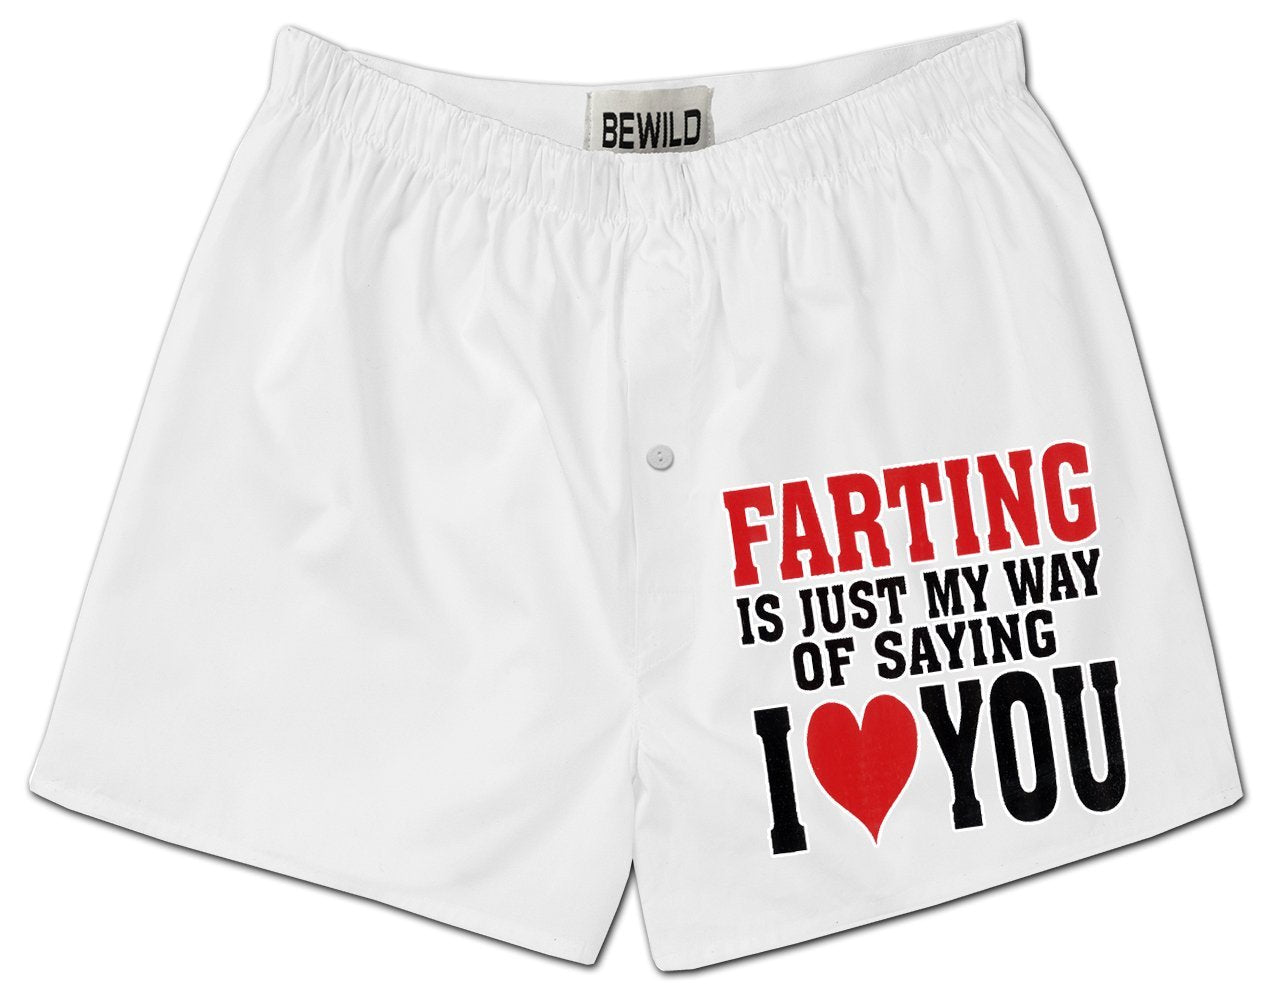 Farting Is My Way Of Saying I Love You Boxer Shorts